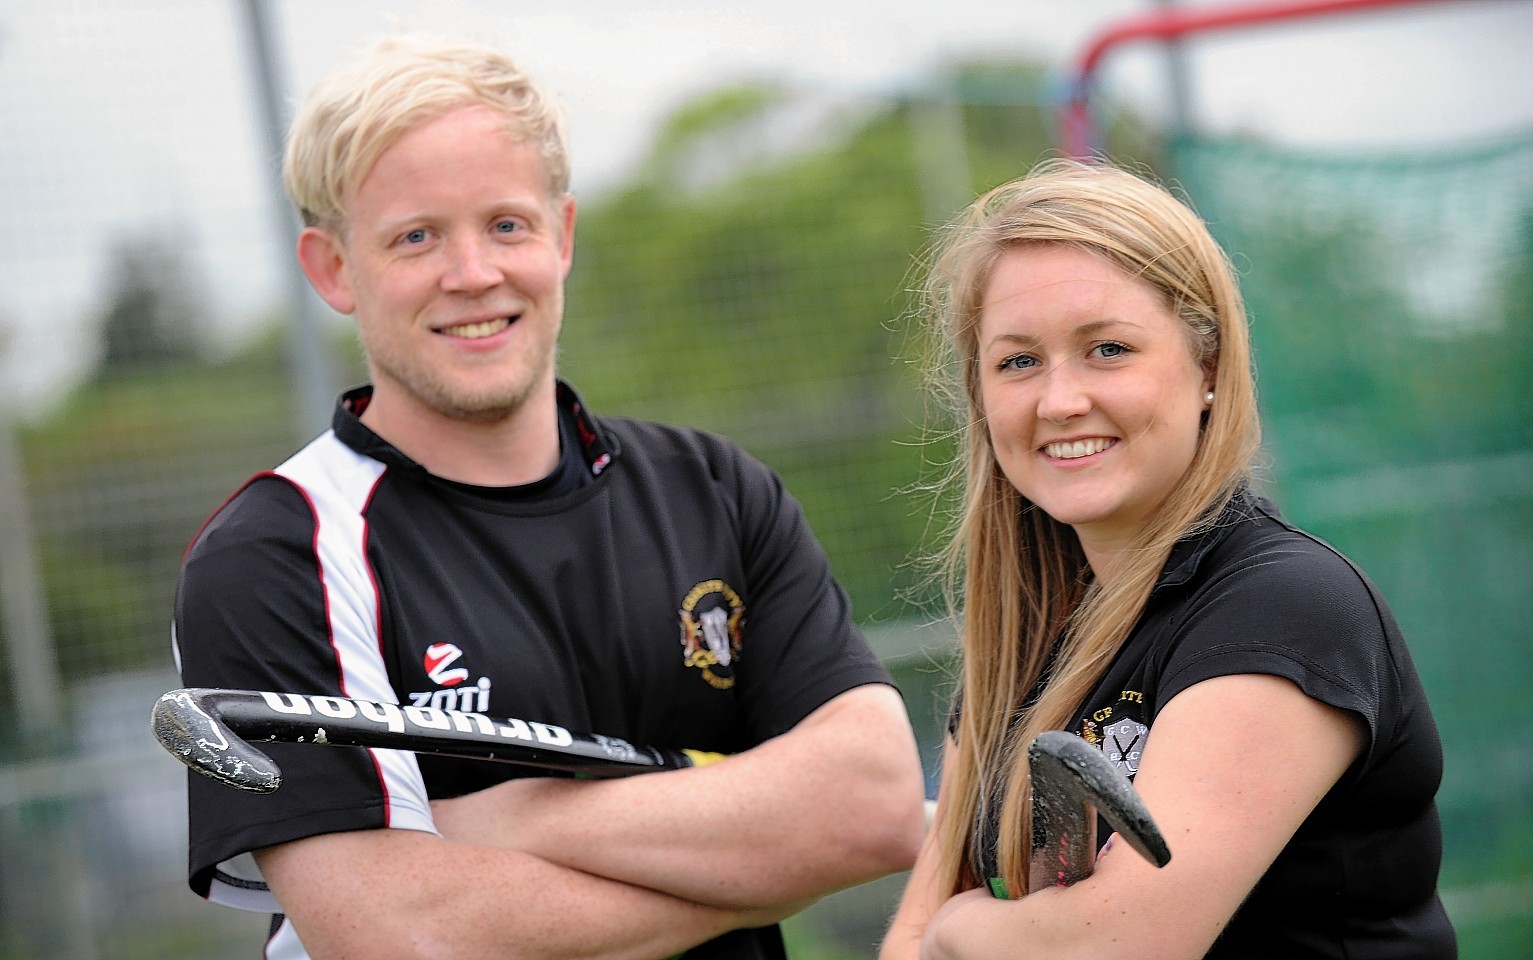 Granite City Wanderers captains Leon Wilkie and Jane Cargill are ready for cup final action